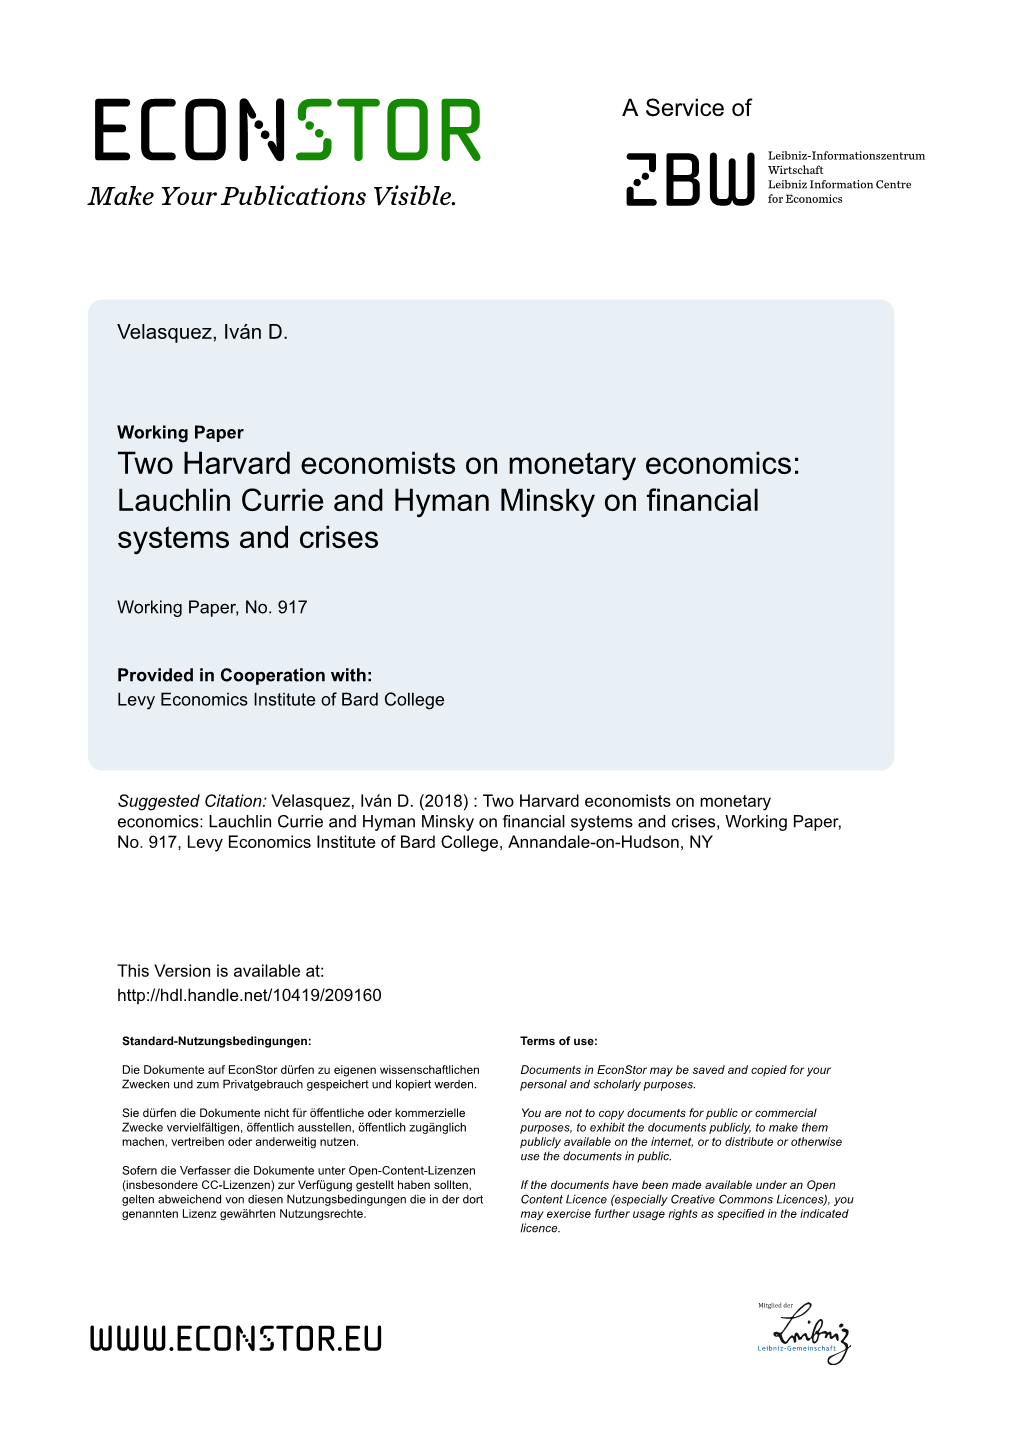 Two Harvard Economists on Monetary Economics: Lauchlin Currie and Hyman Minsky on Financial Systems and Crises